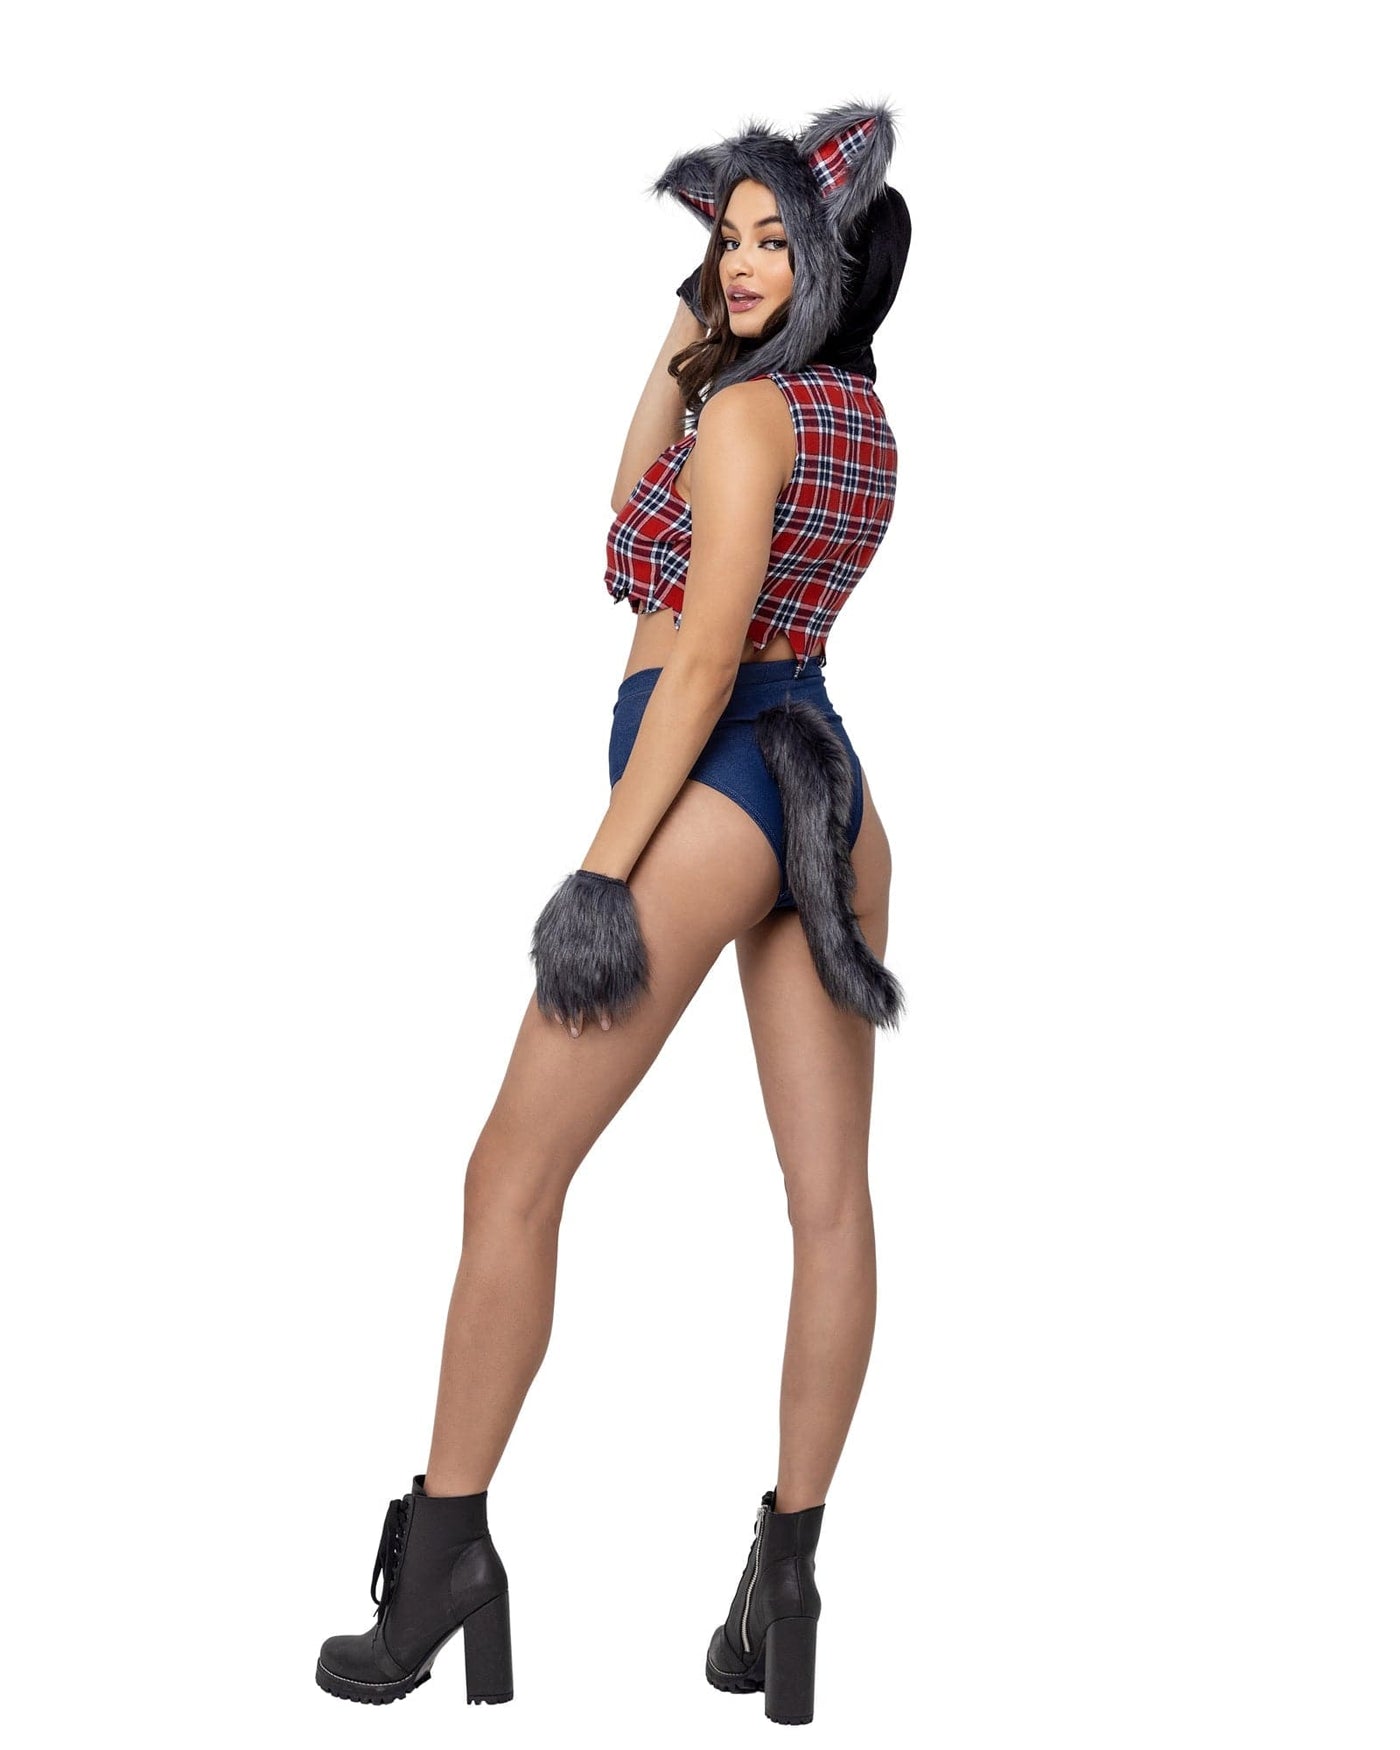 3pc. Sultry She Wolf Women's Costume - For Love of Lingerie